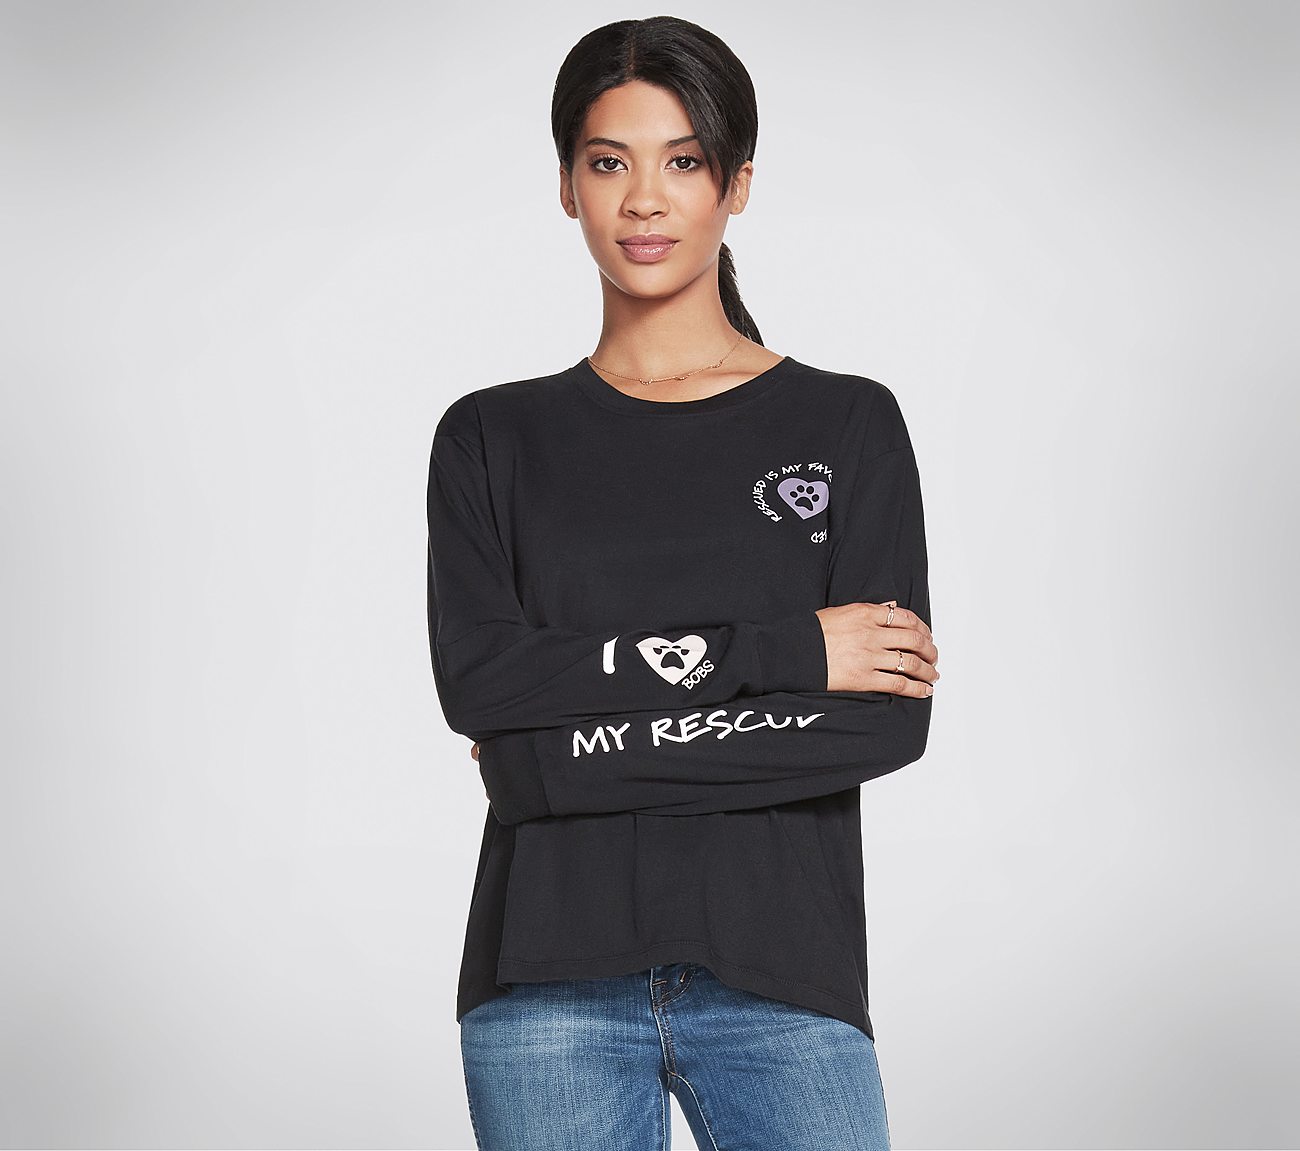 I LUV MY RESCUE LONG SLEEVE T, BBBBLACK Apparel Left View